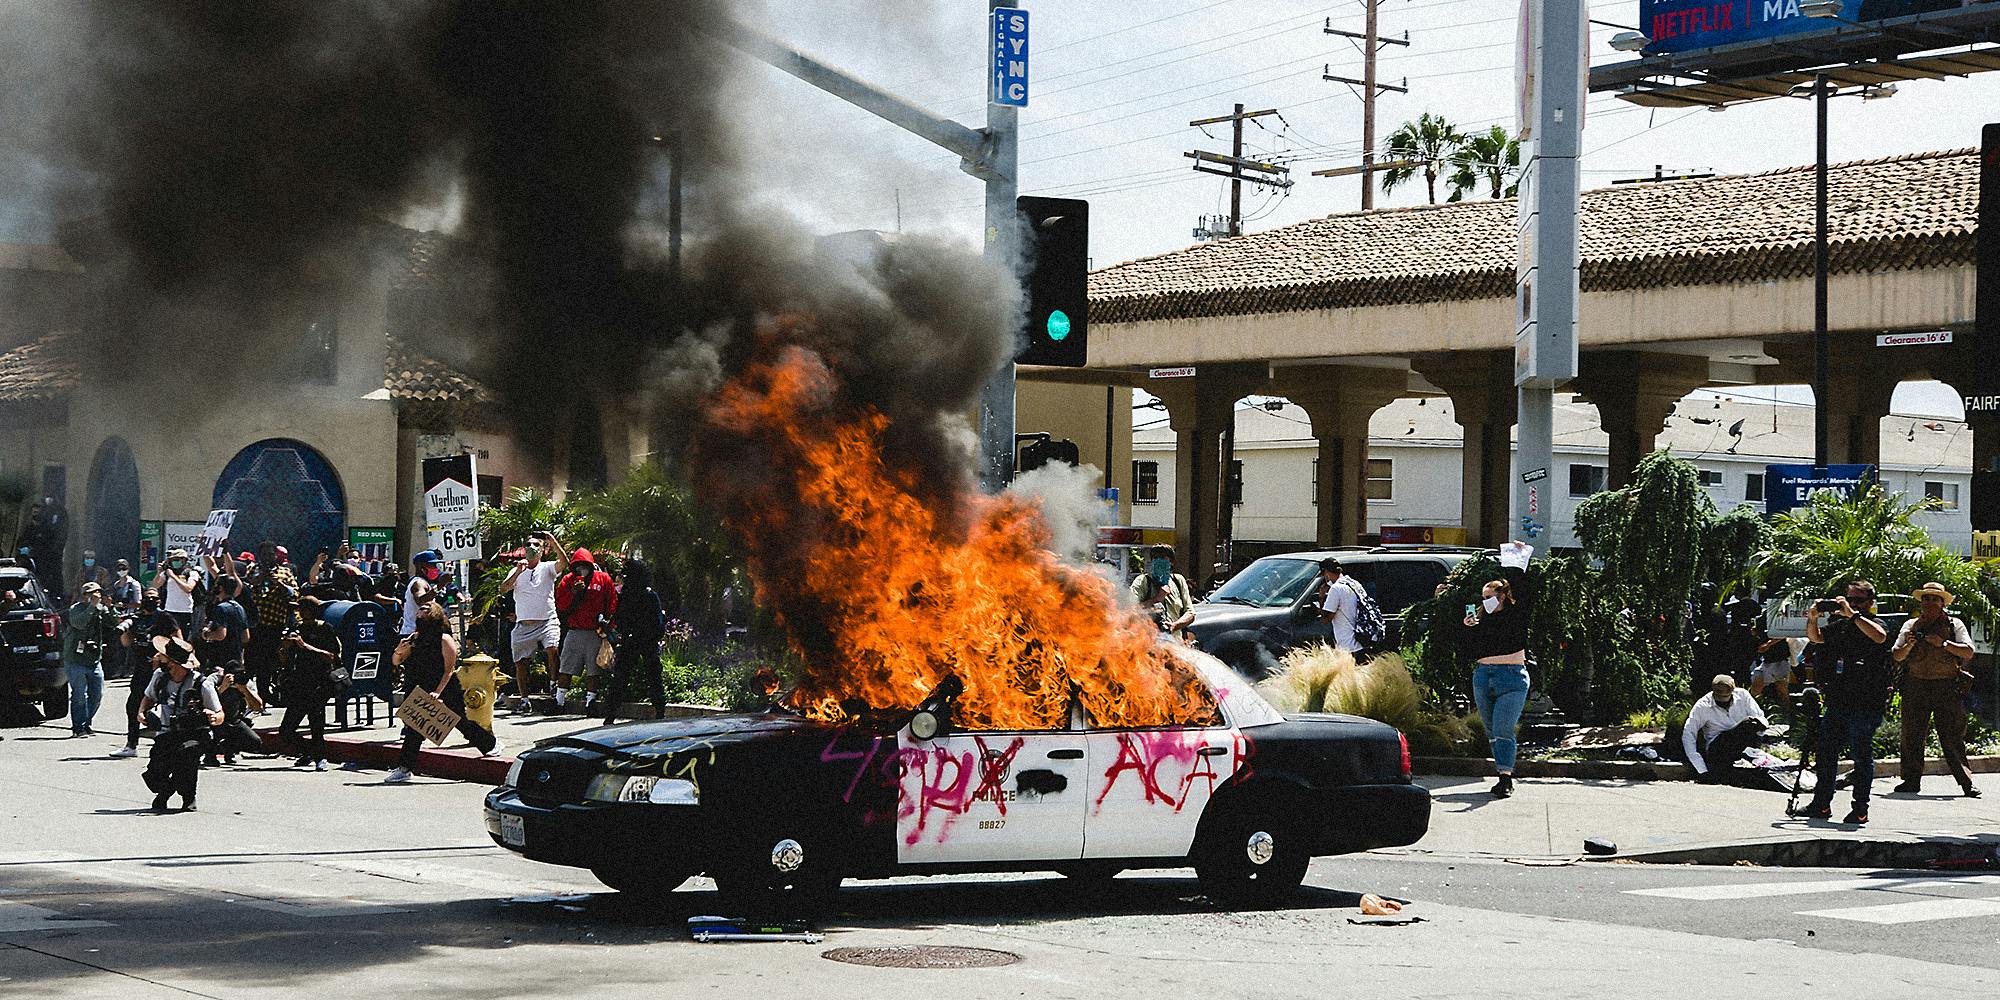 An LAPD car on fire while people watch it burn.